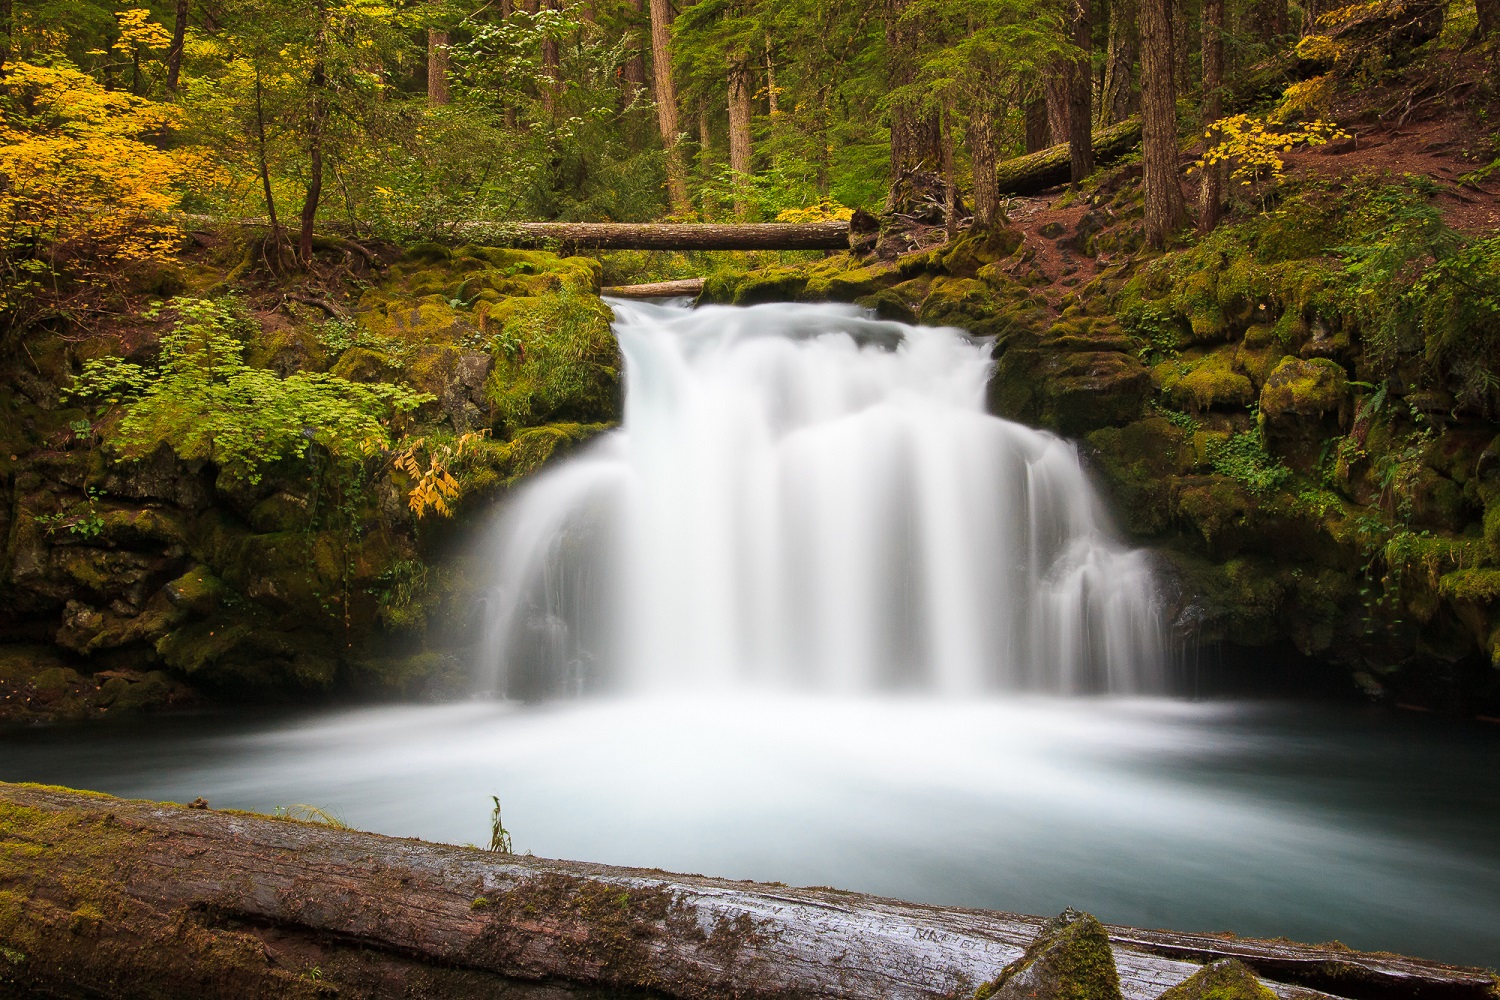 Waterfall Class - Continuing Education at Seattle Central College 